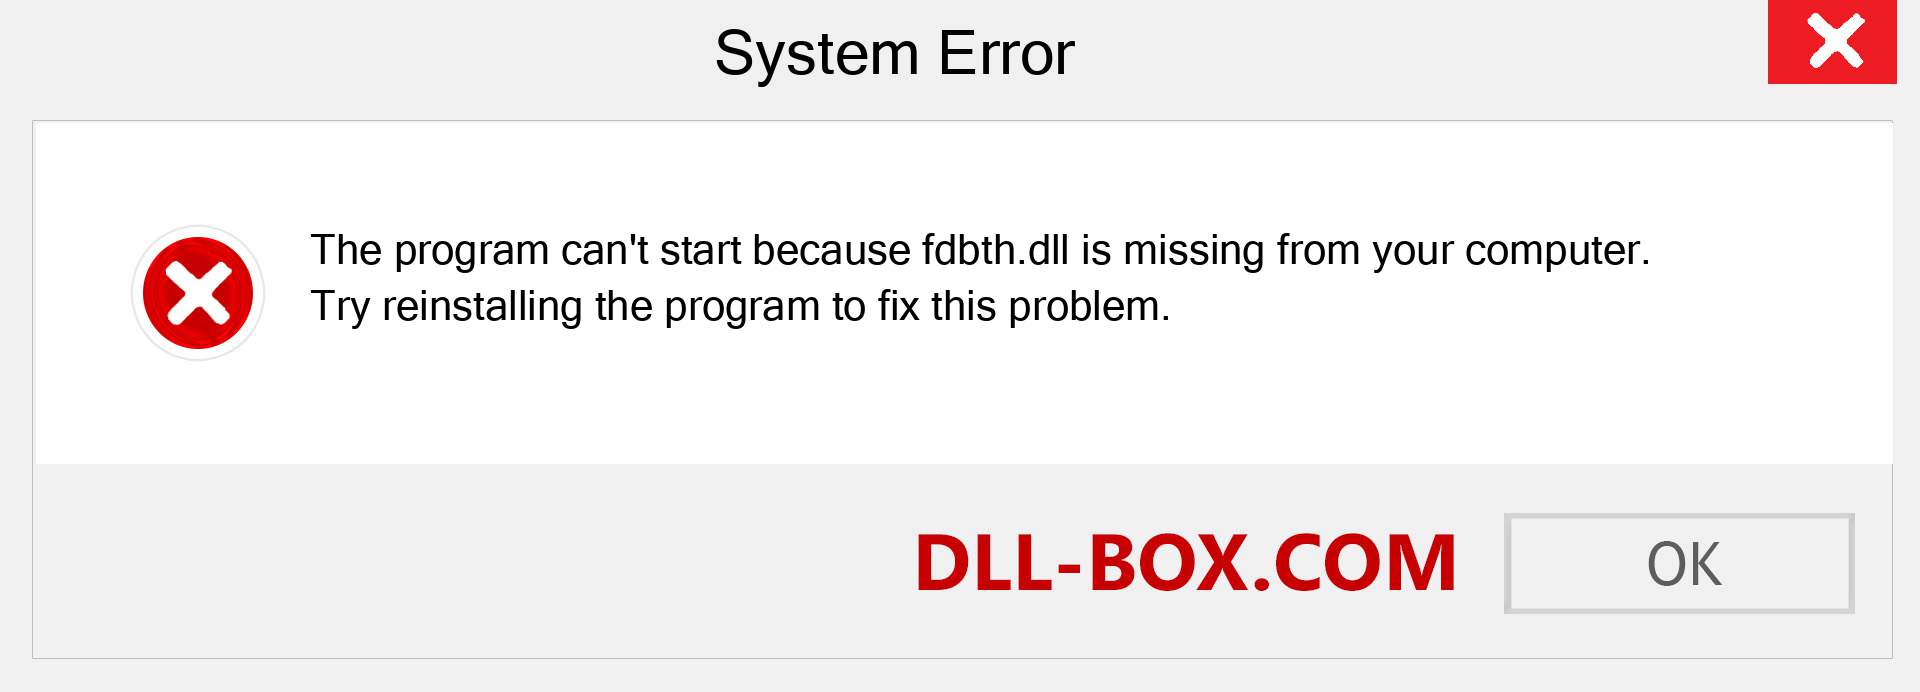  fdbth.dll file is missing?. Download for Windows 7, 8, 10 - Fix  fdbth dll Missing Error on Windows, photos, images